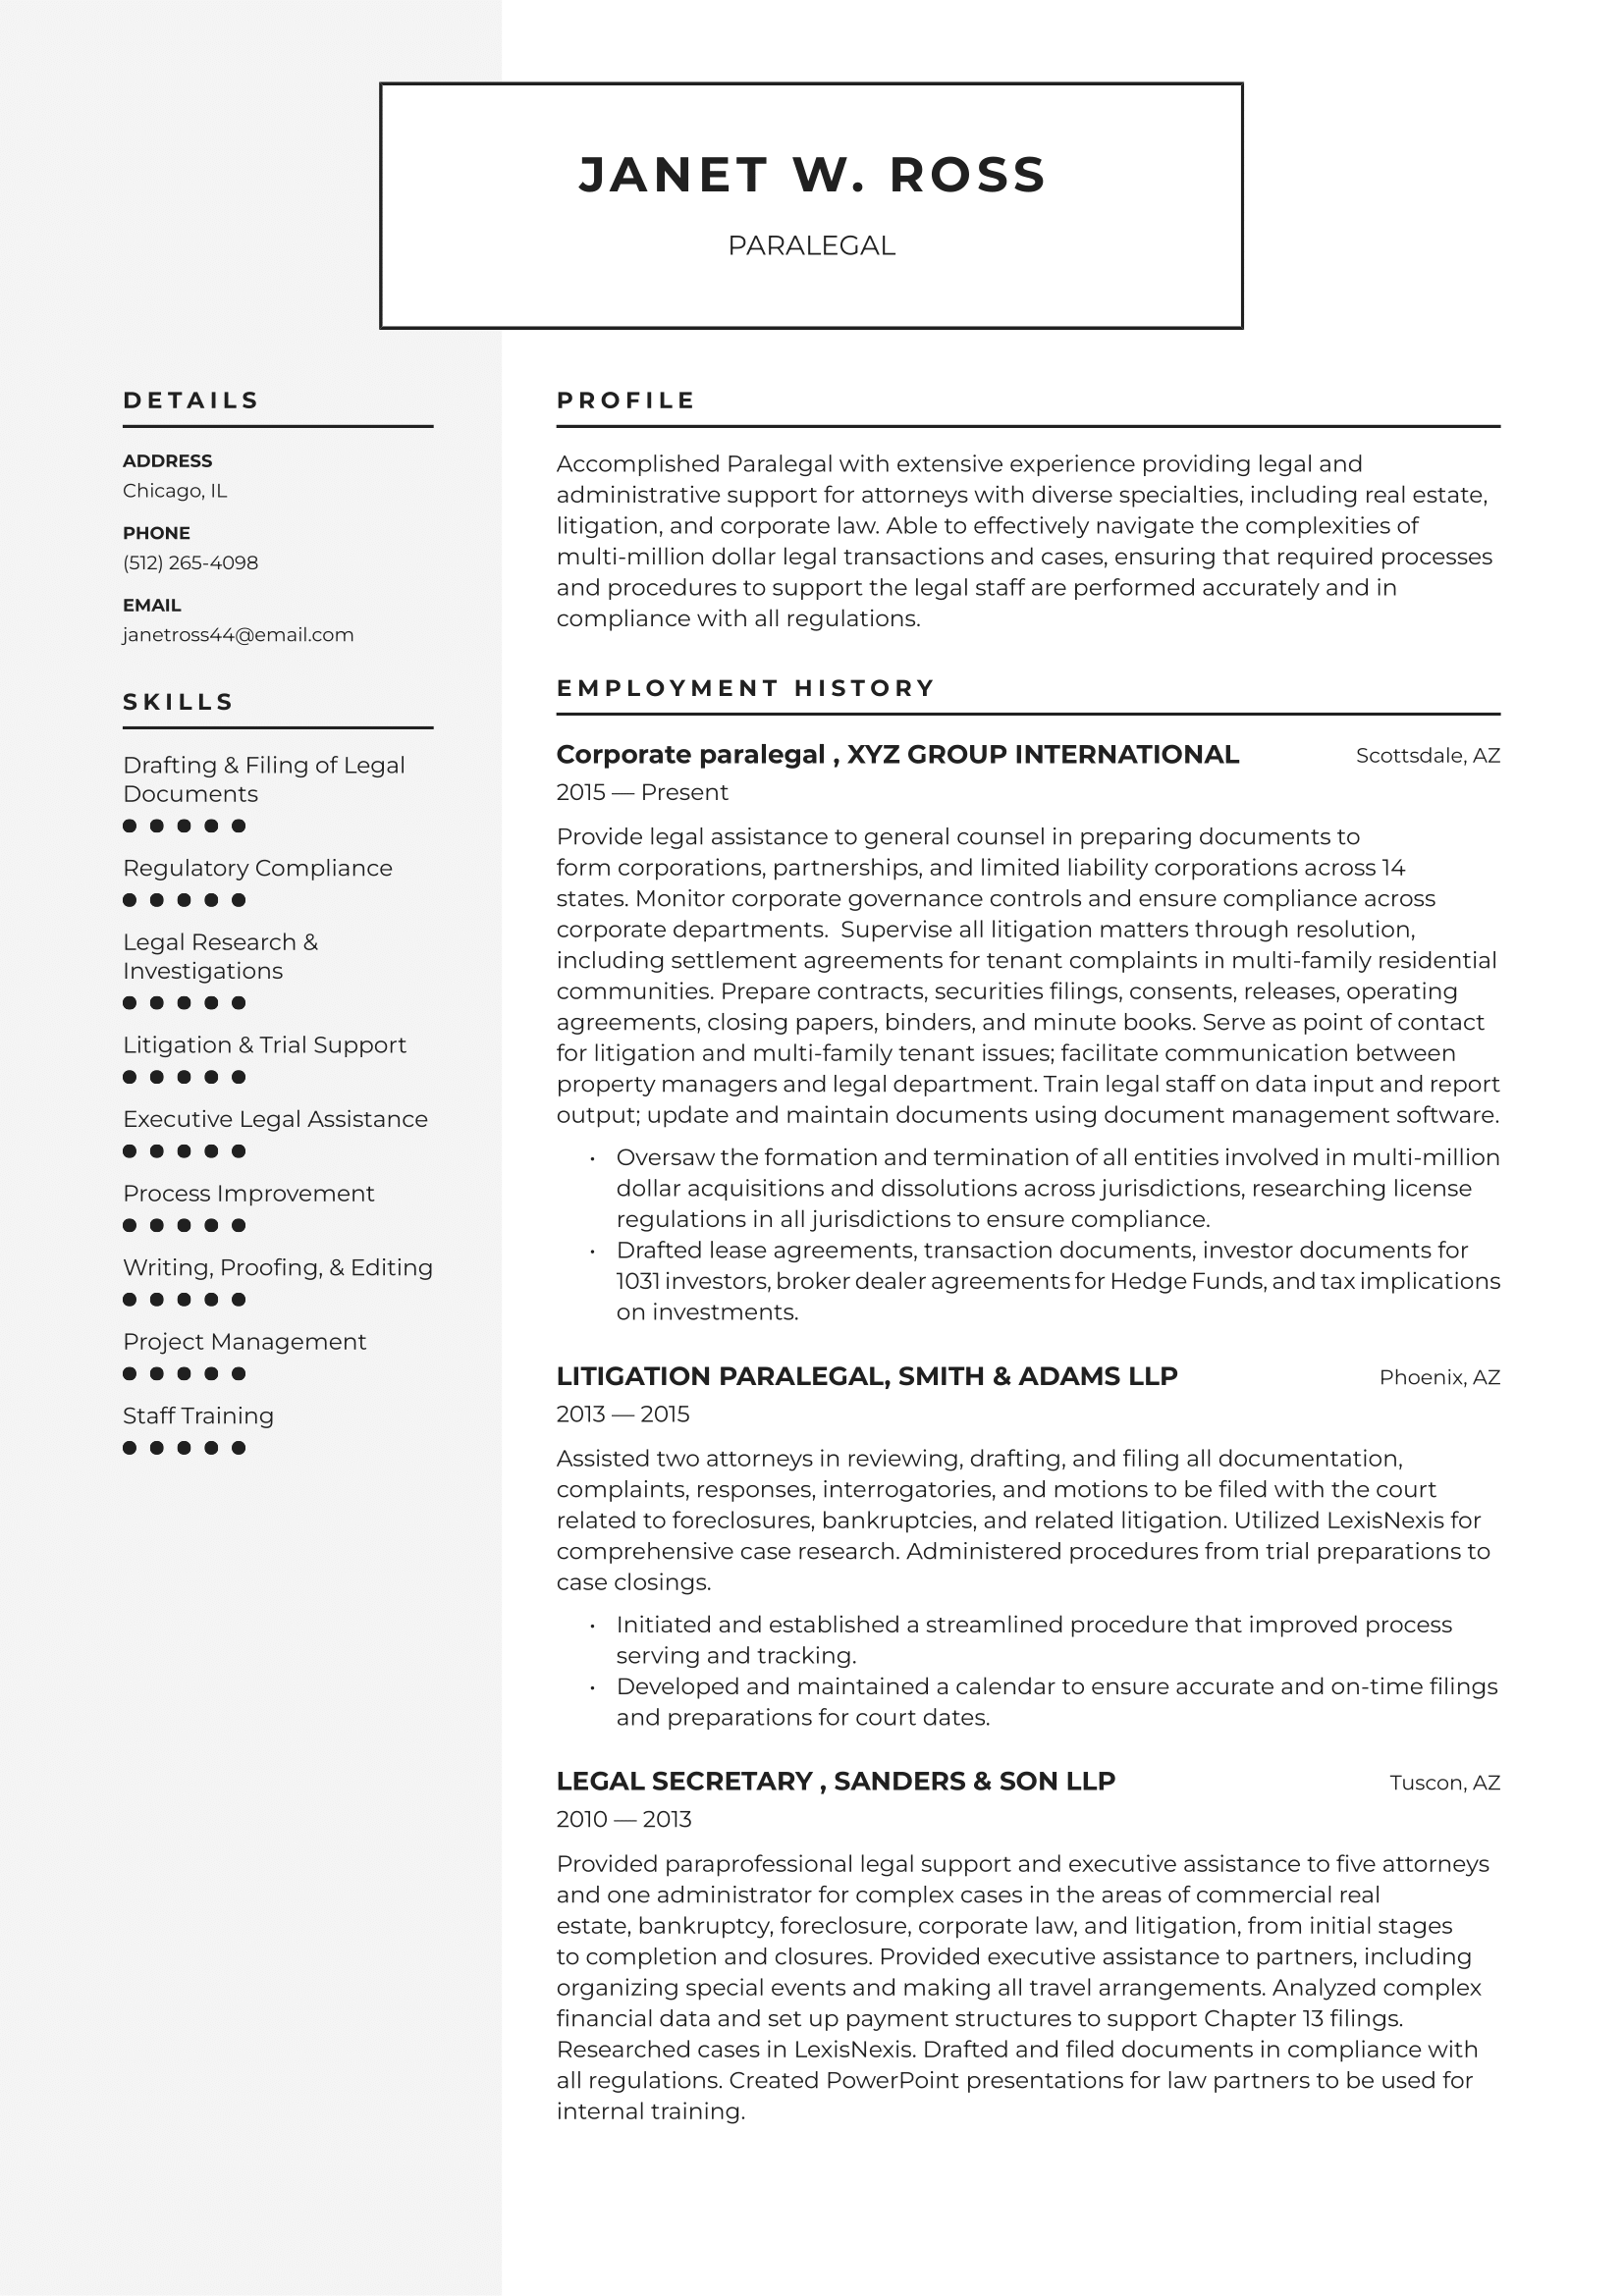 Paralegal-Resume-Example.png